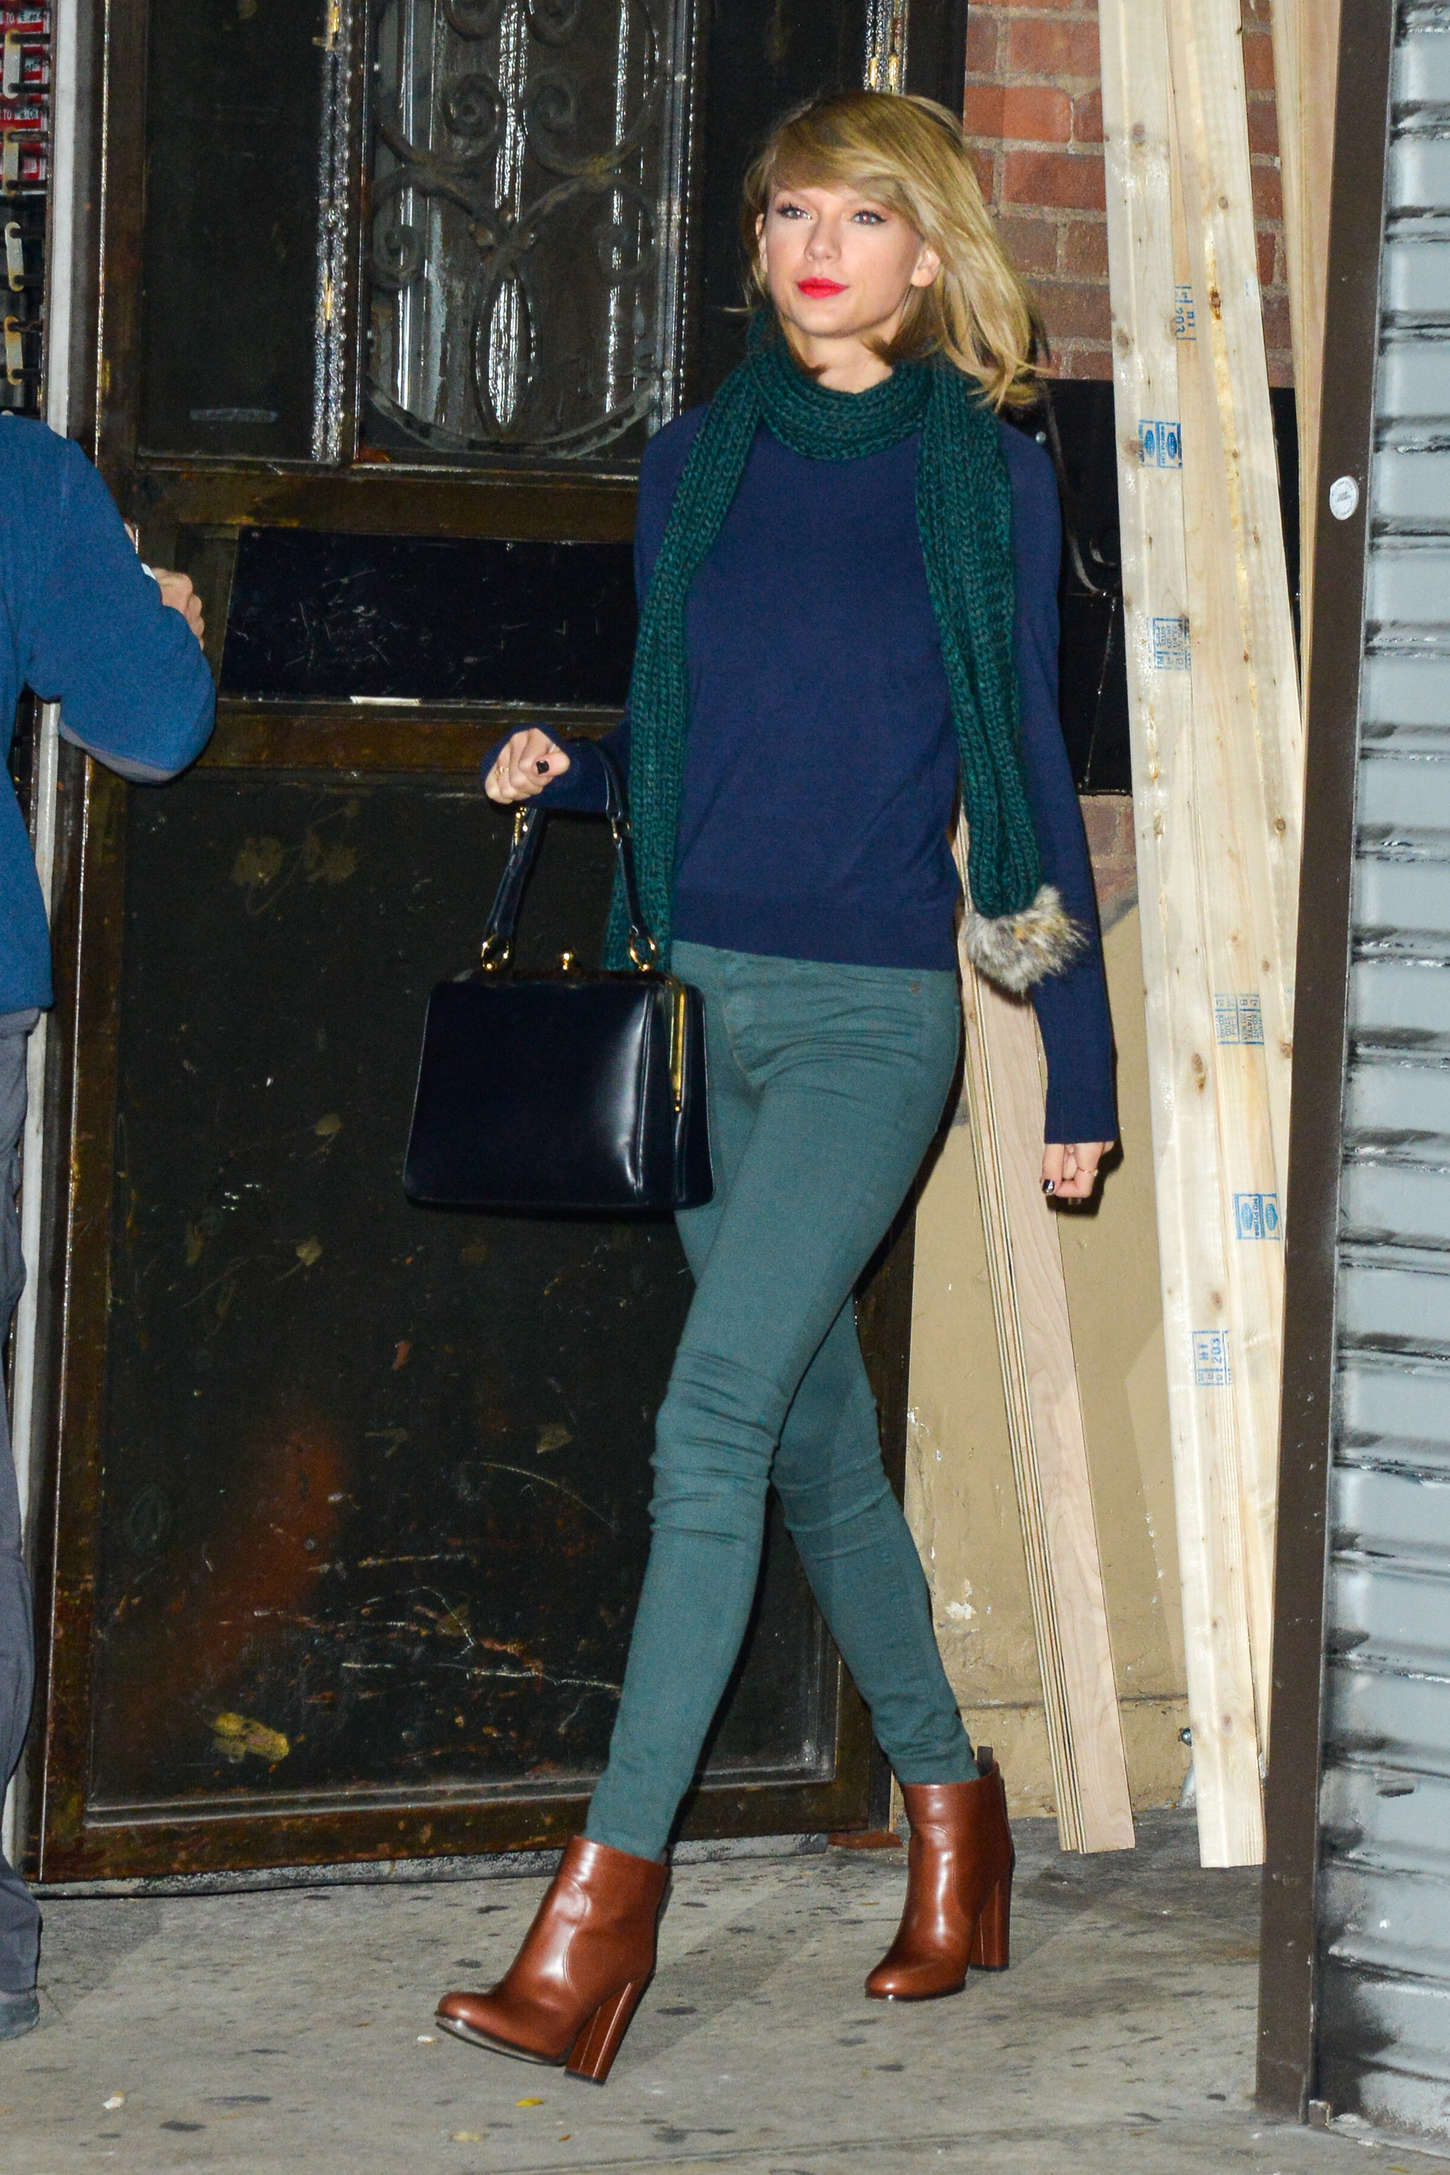 Taylor Swift in Green Tight Jeans -04 | GotCeleb